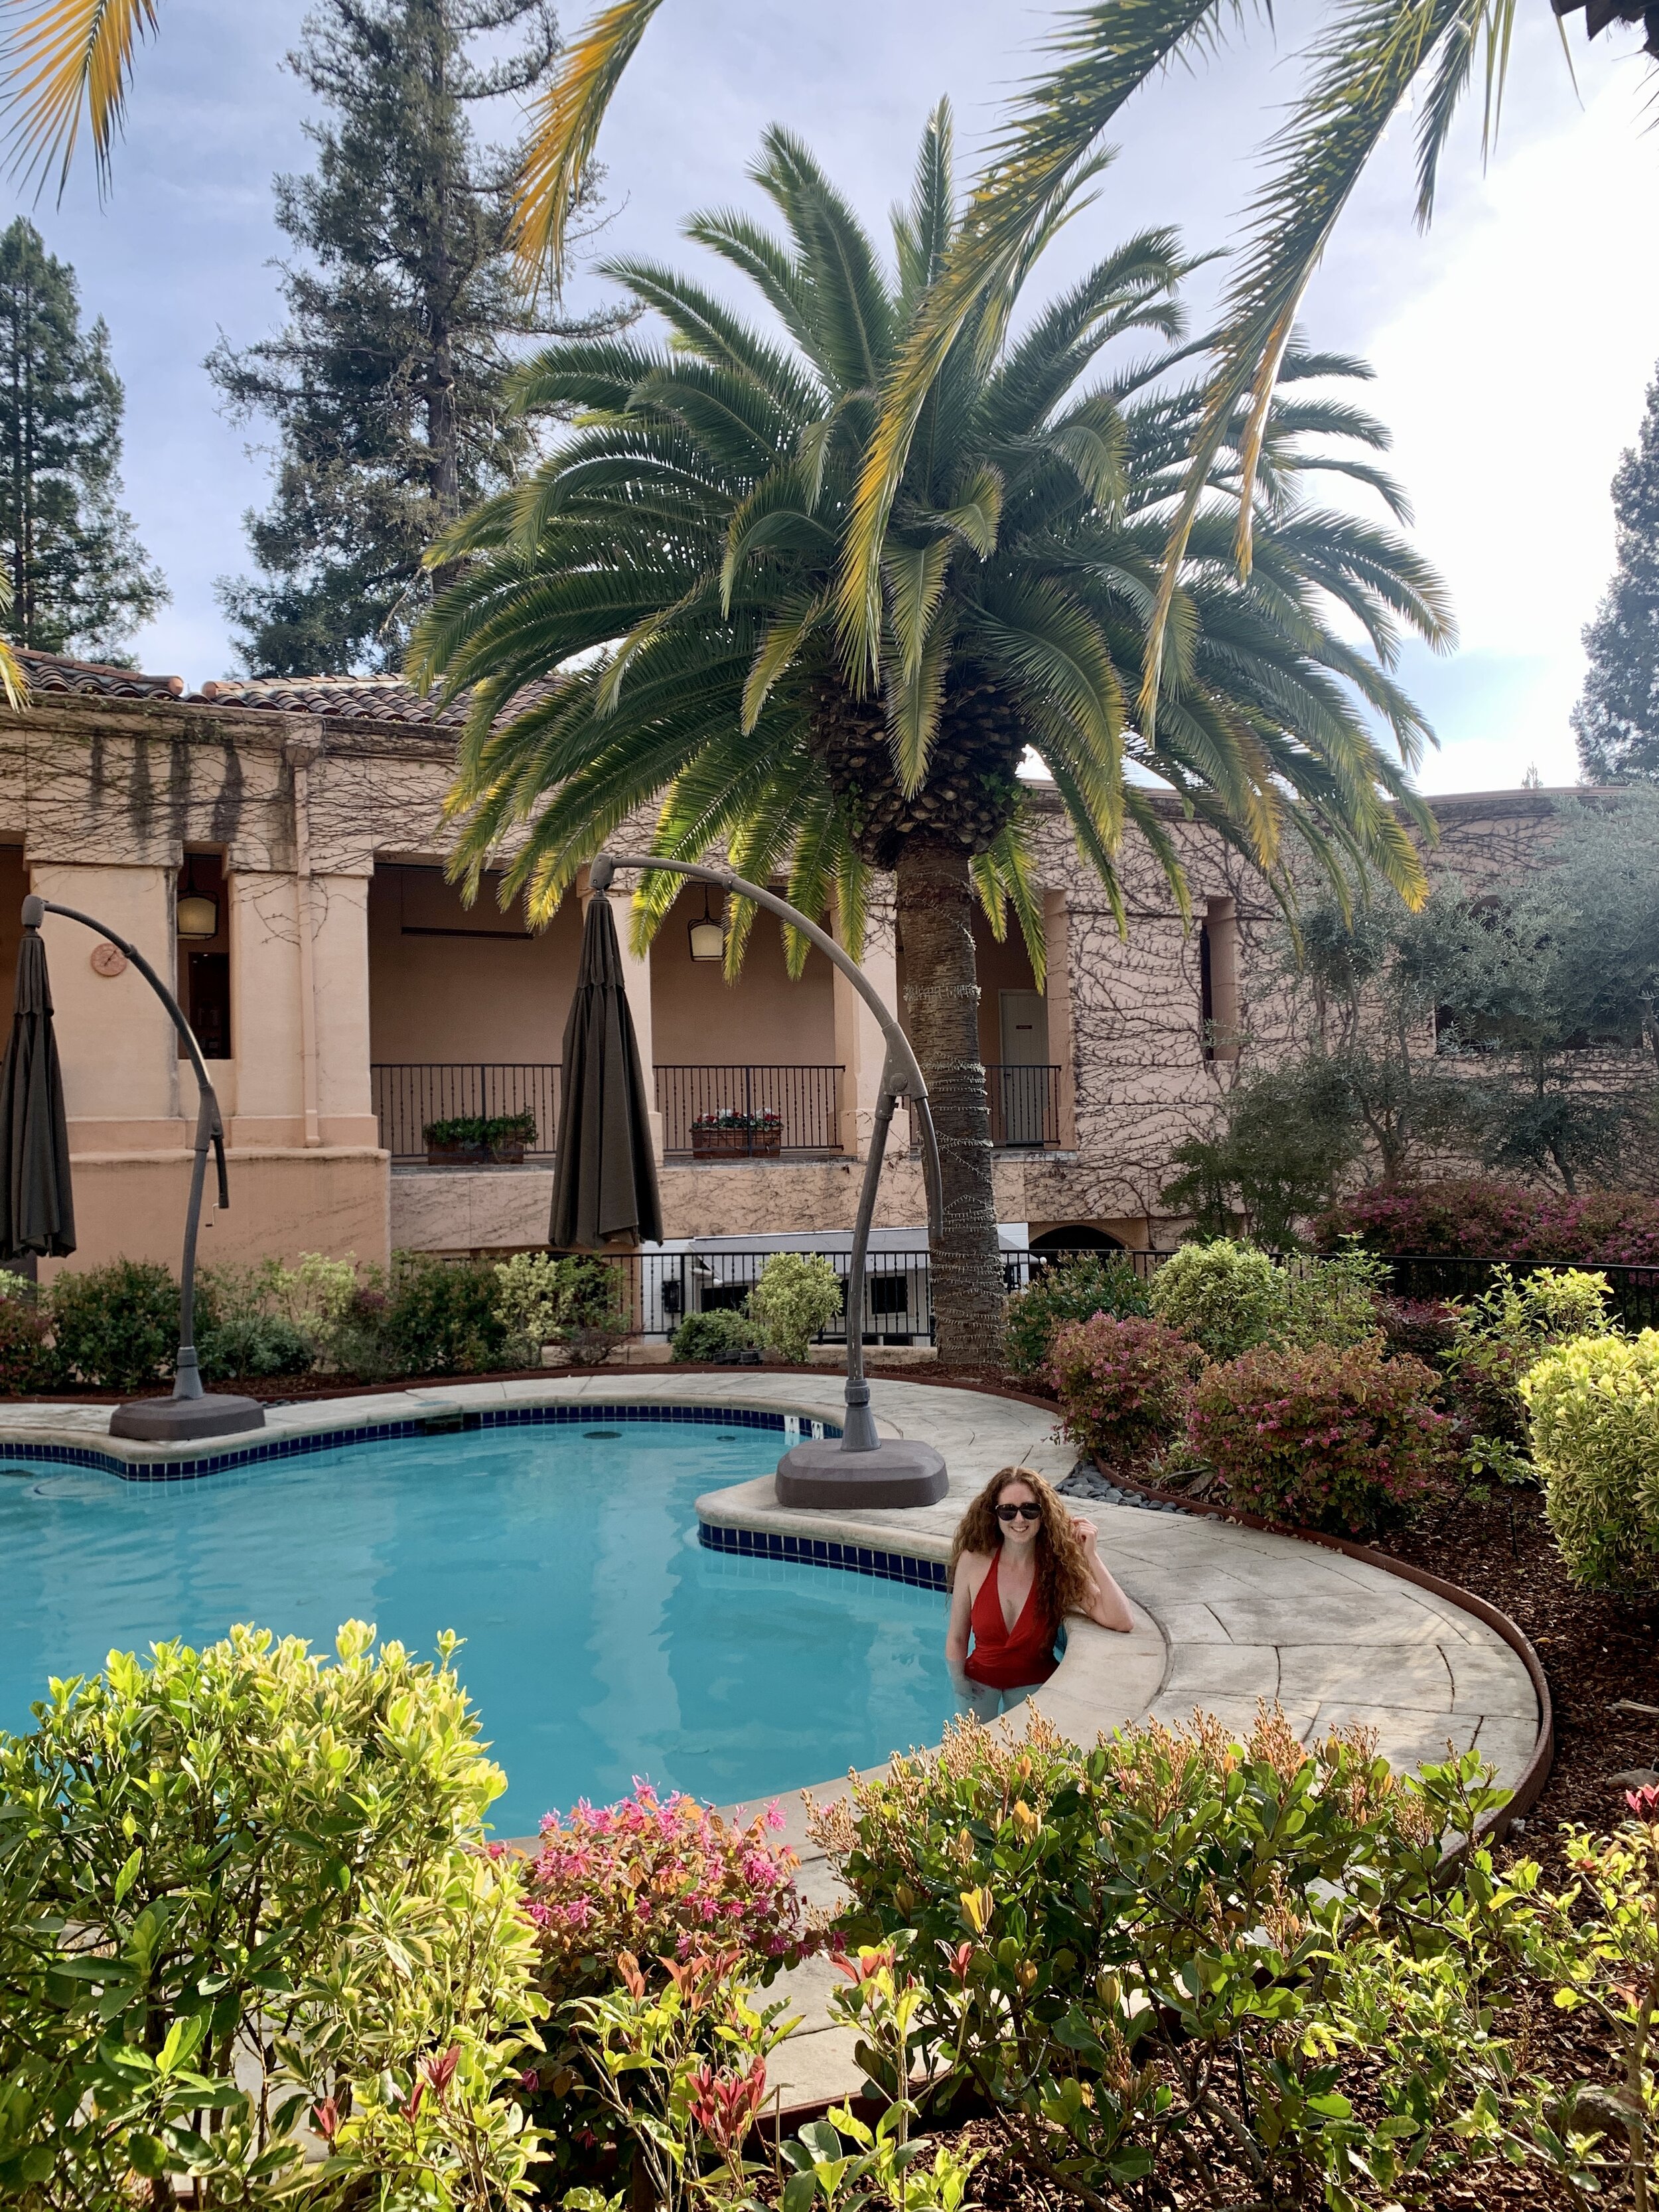 Fairmont Sonoma Mission Inn & Spa Review  - the Watsu pool from hot springs at the Fairmont Sonoma.jpg